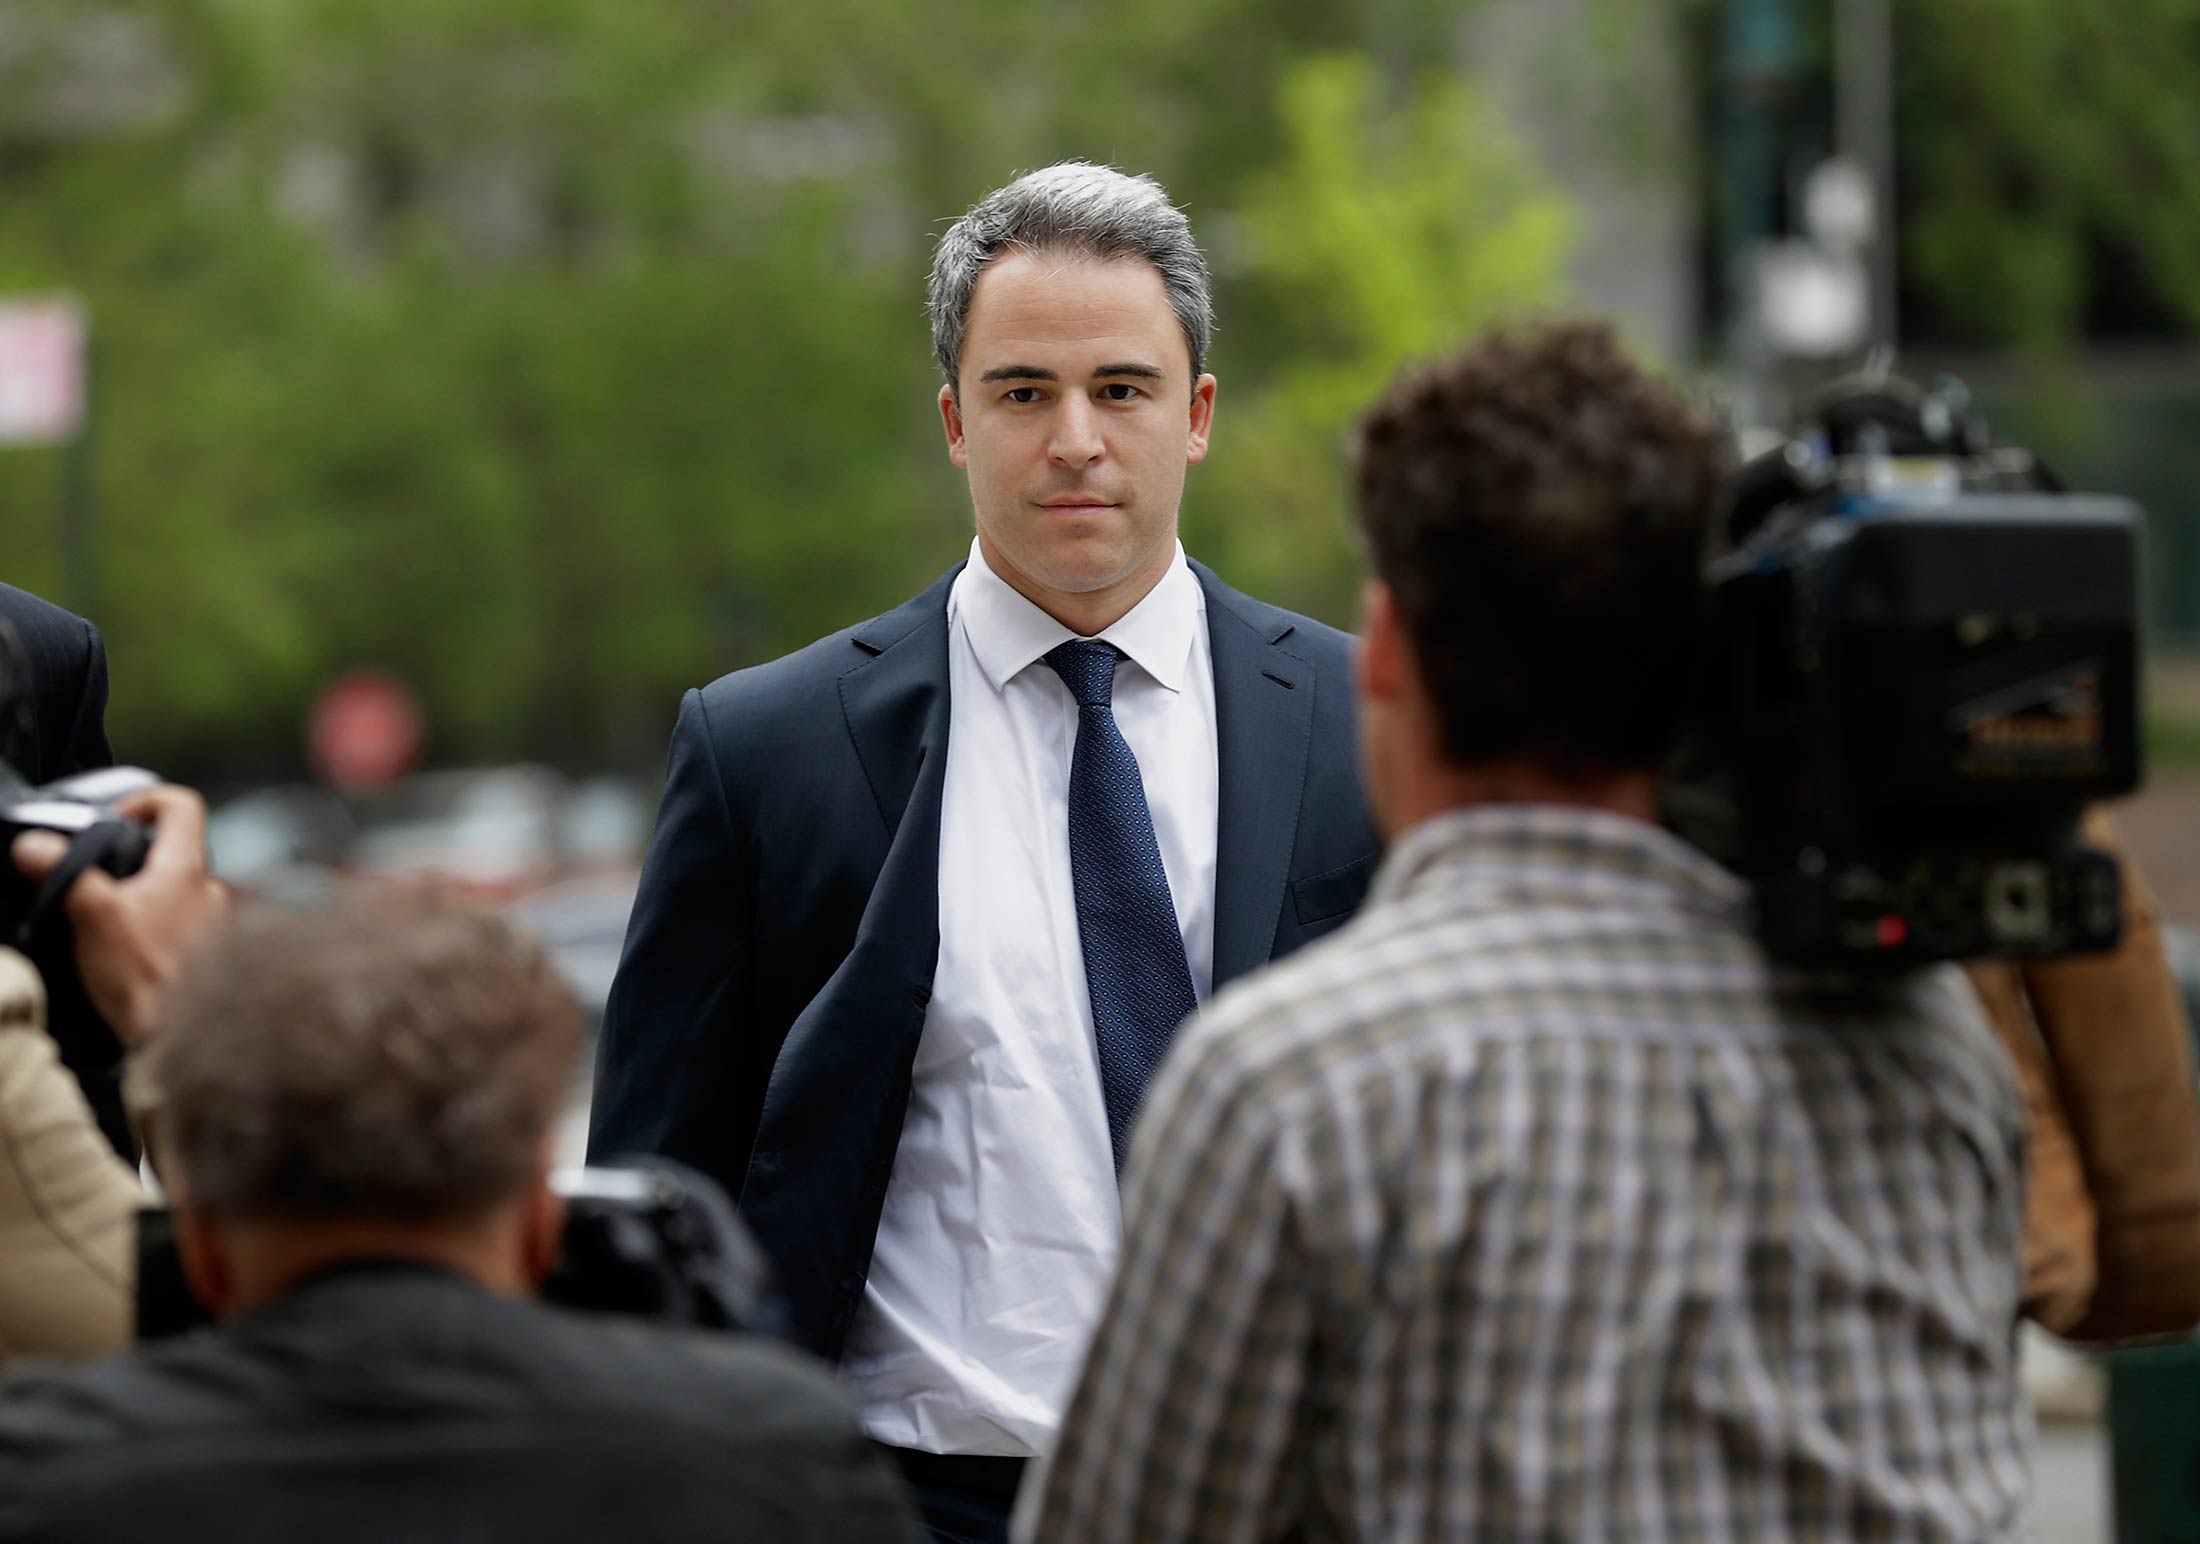 Michael Steinberg, a former fund manager with SAC Capital Advisors LP, arrives at federal court for a sentencing hearing in New York, on May 16, 2014.
